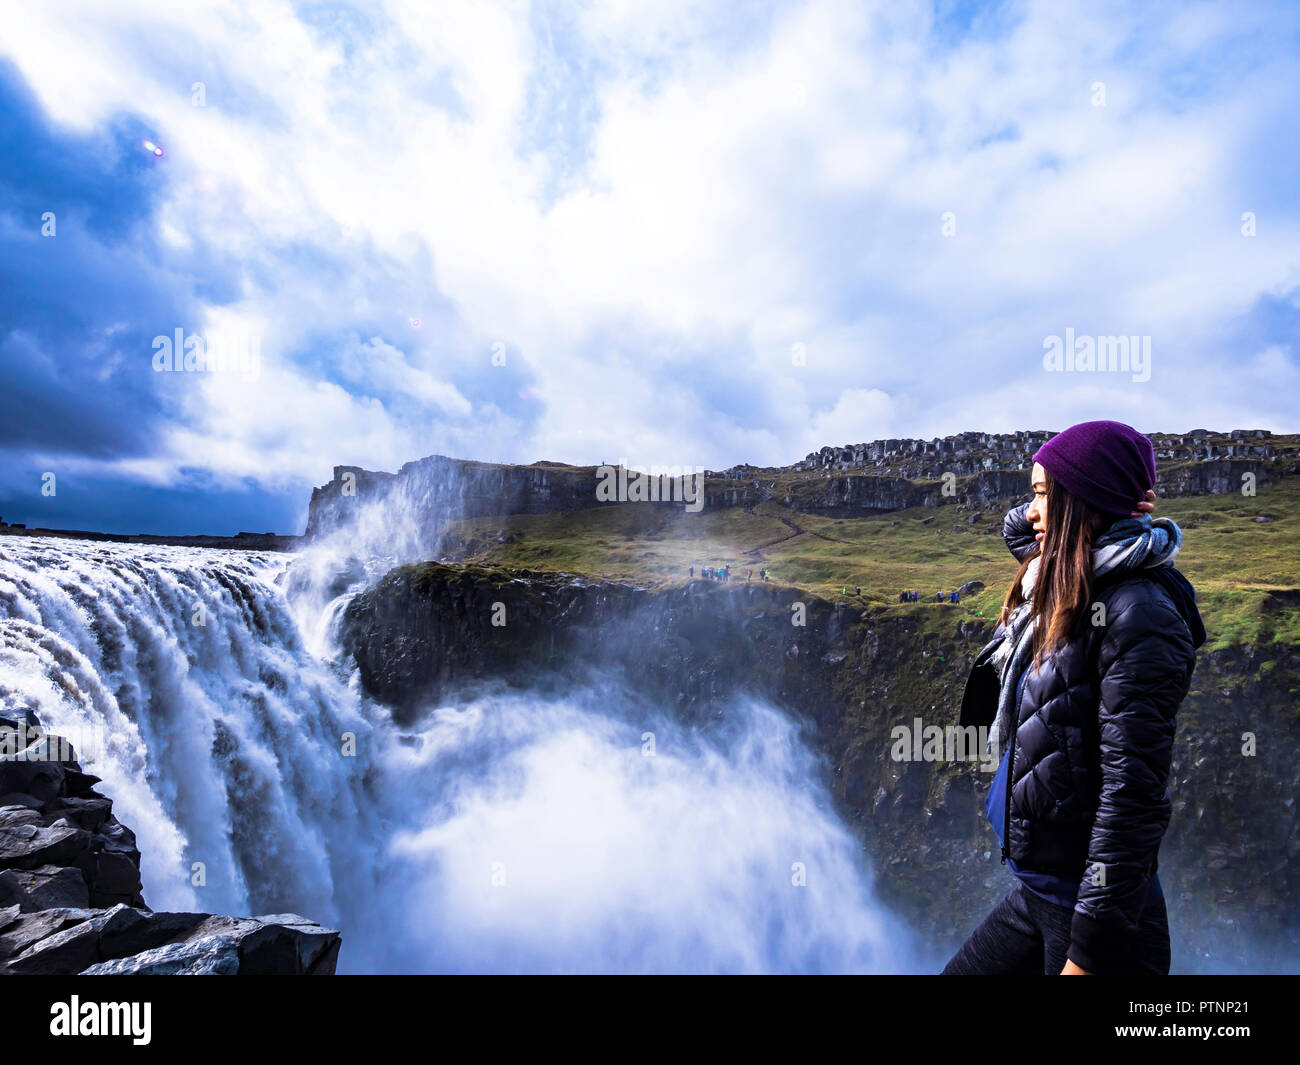 Traveller enjoying the scenery at Selfoss Waterfall in Northern Iceland Stock Photo